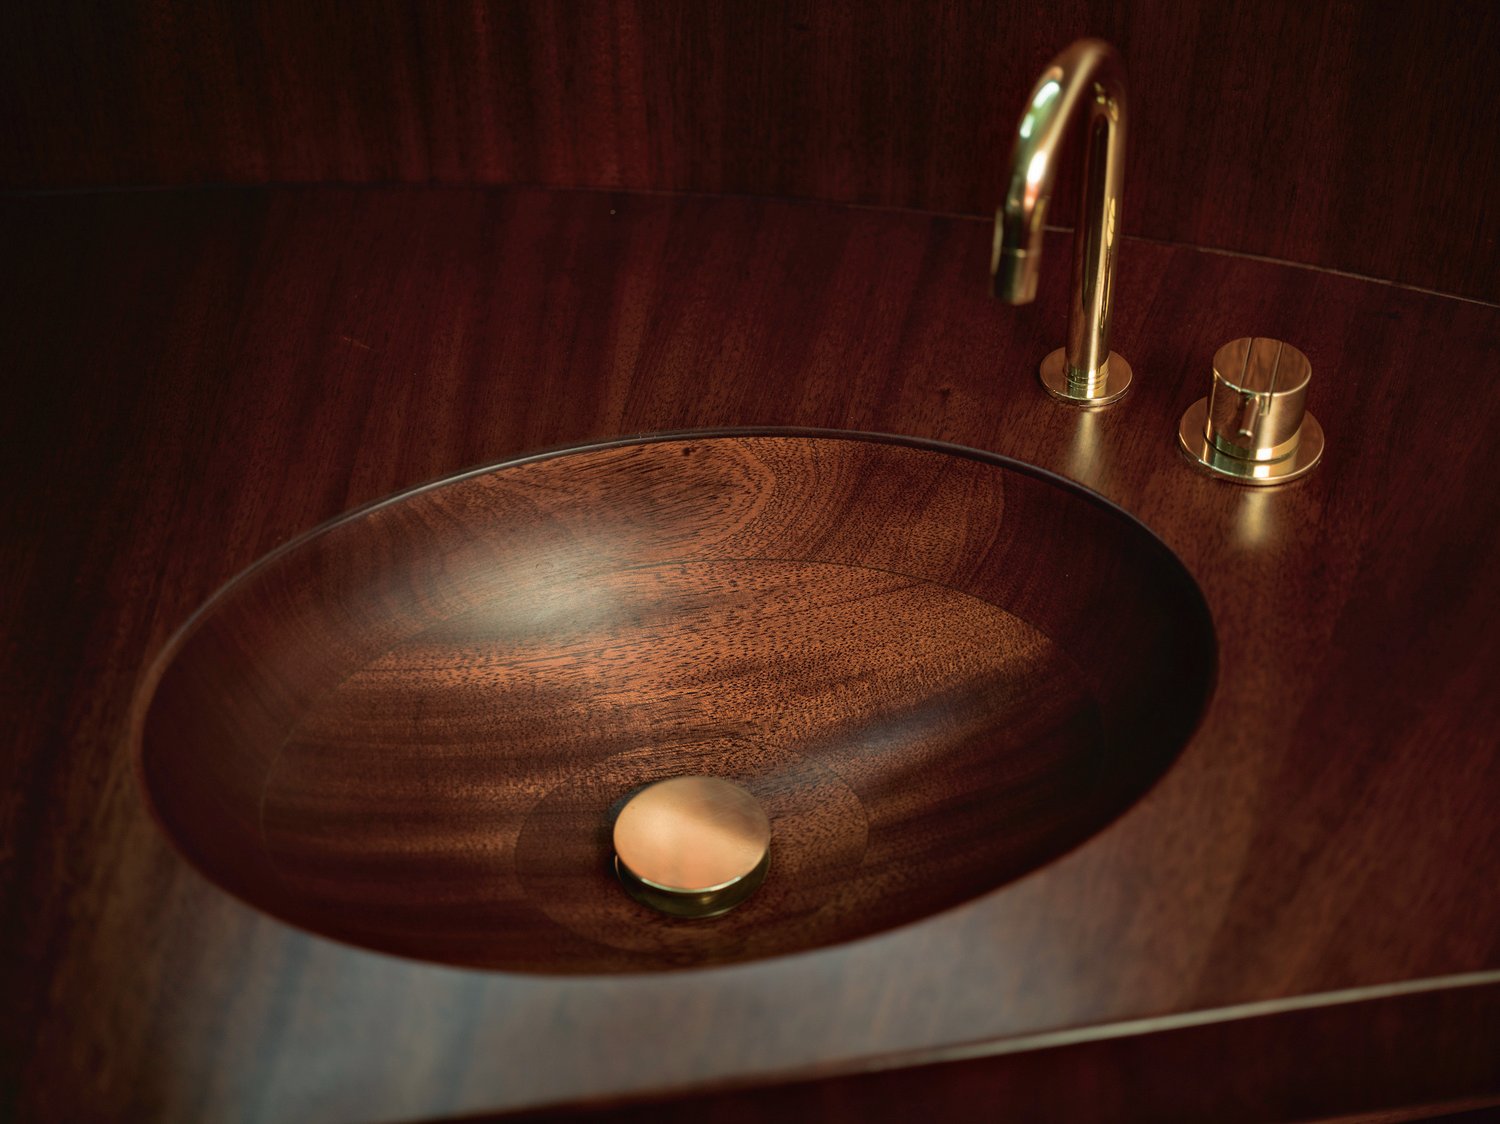 Courtesy Waterline Media | All bathrooms have rounded solid wood sinks built into countertops, plus power showers